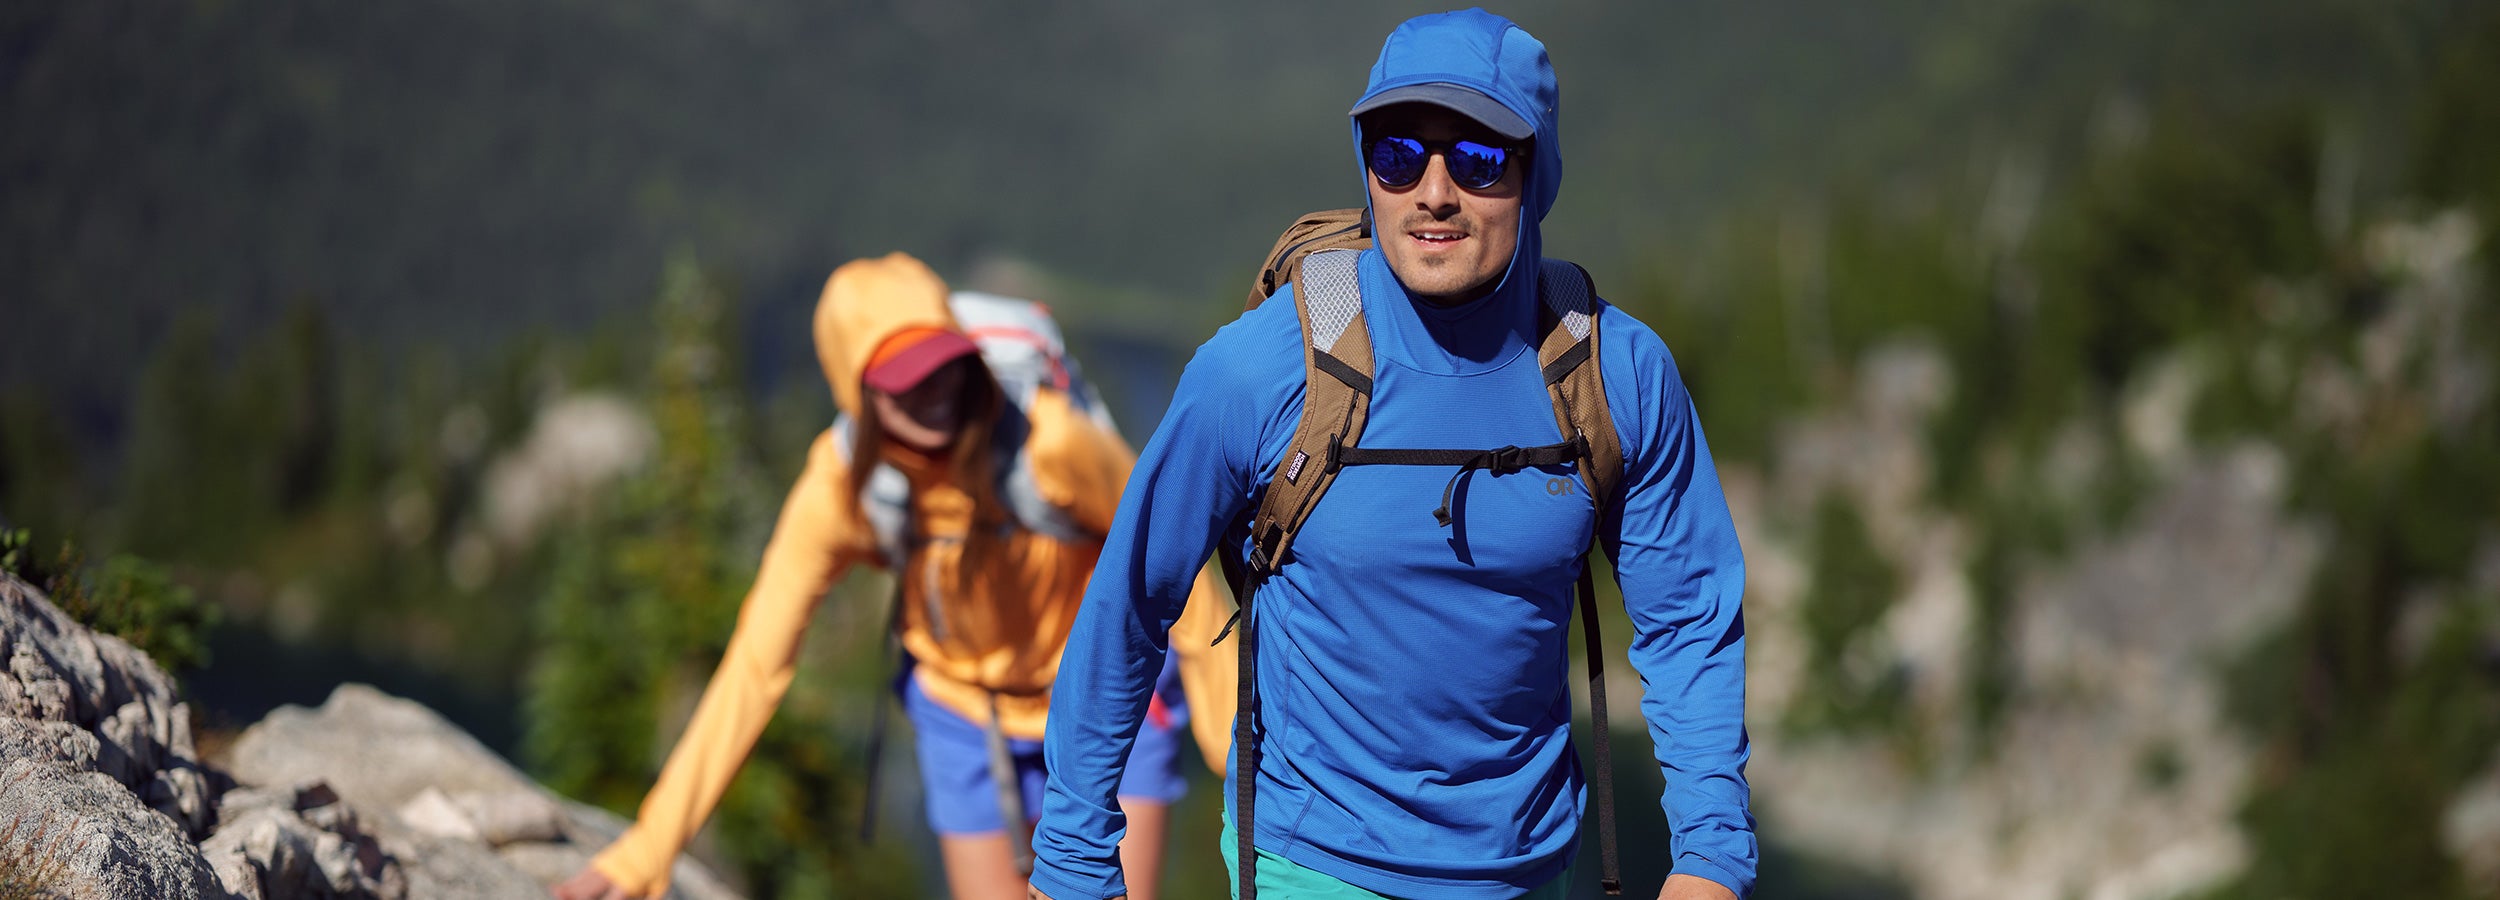 Springing into Adventure: The Essential Guide to UPF Clothing